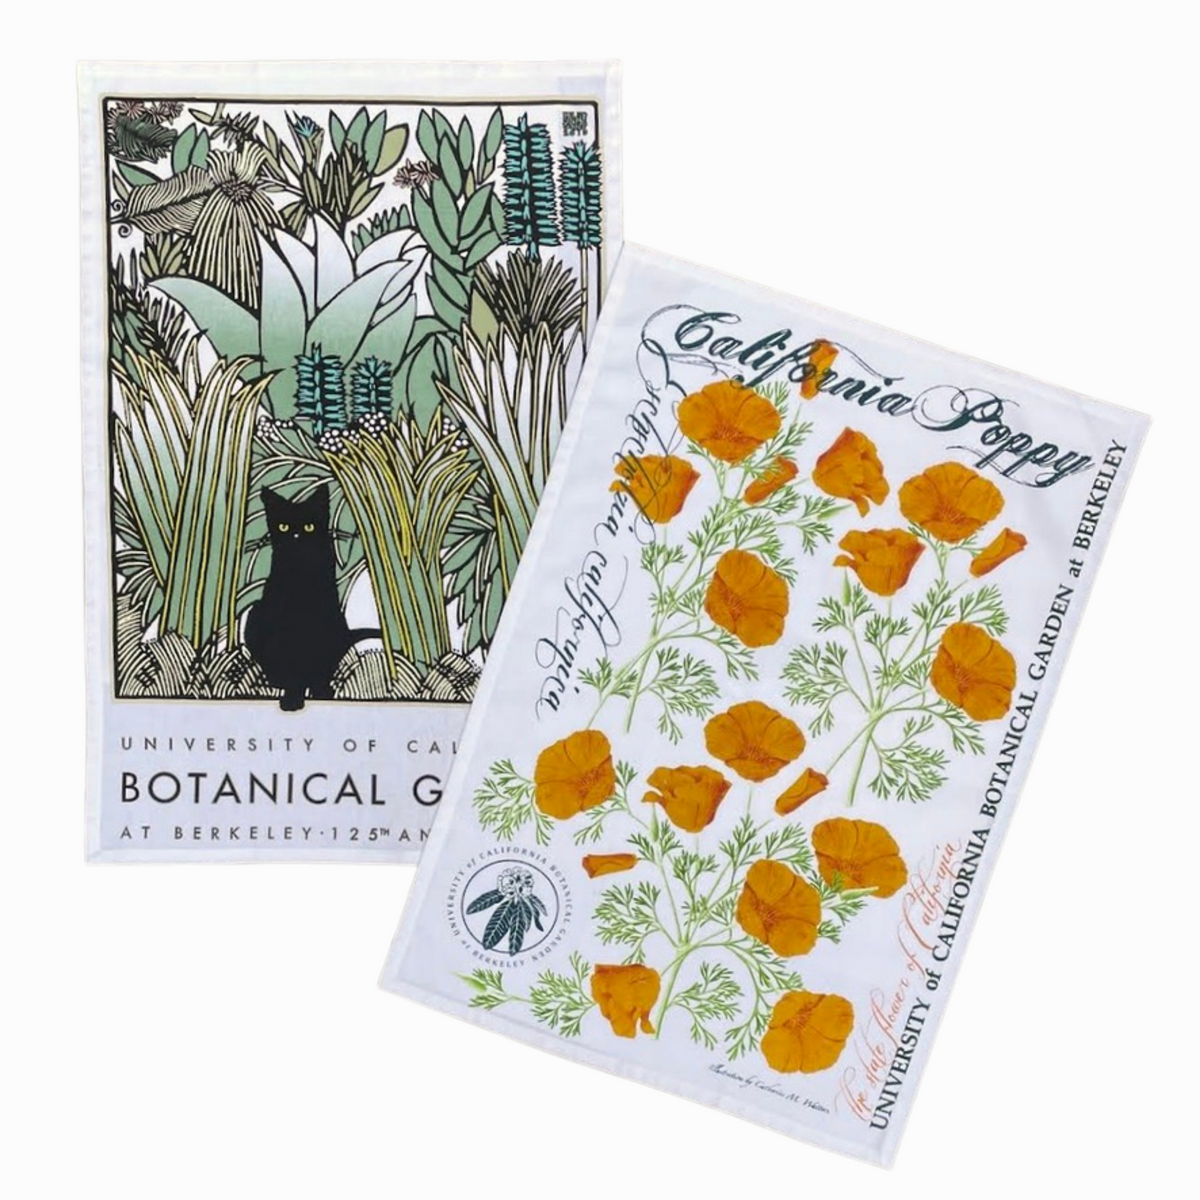 Giftologists - Introducing an artful new take on the kitchen tea towel. 💦  Made from post-consumer recycled materials, these new sustainable 𝗚𝗘𝗢𝗠𝗘𝗧𝗥𝗬  tea towels will be the last tea towel you will